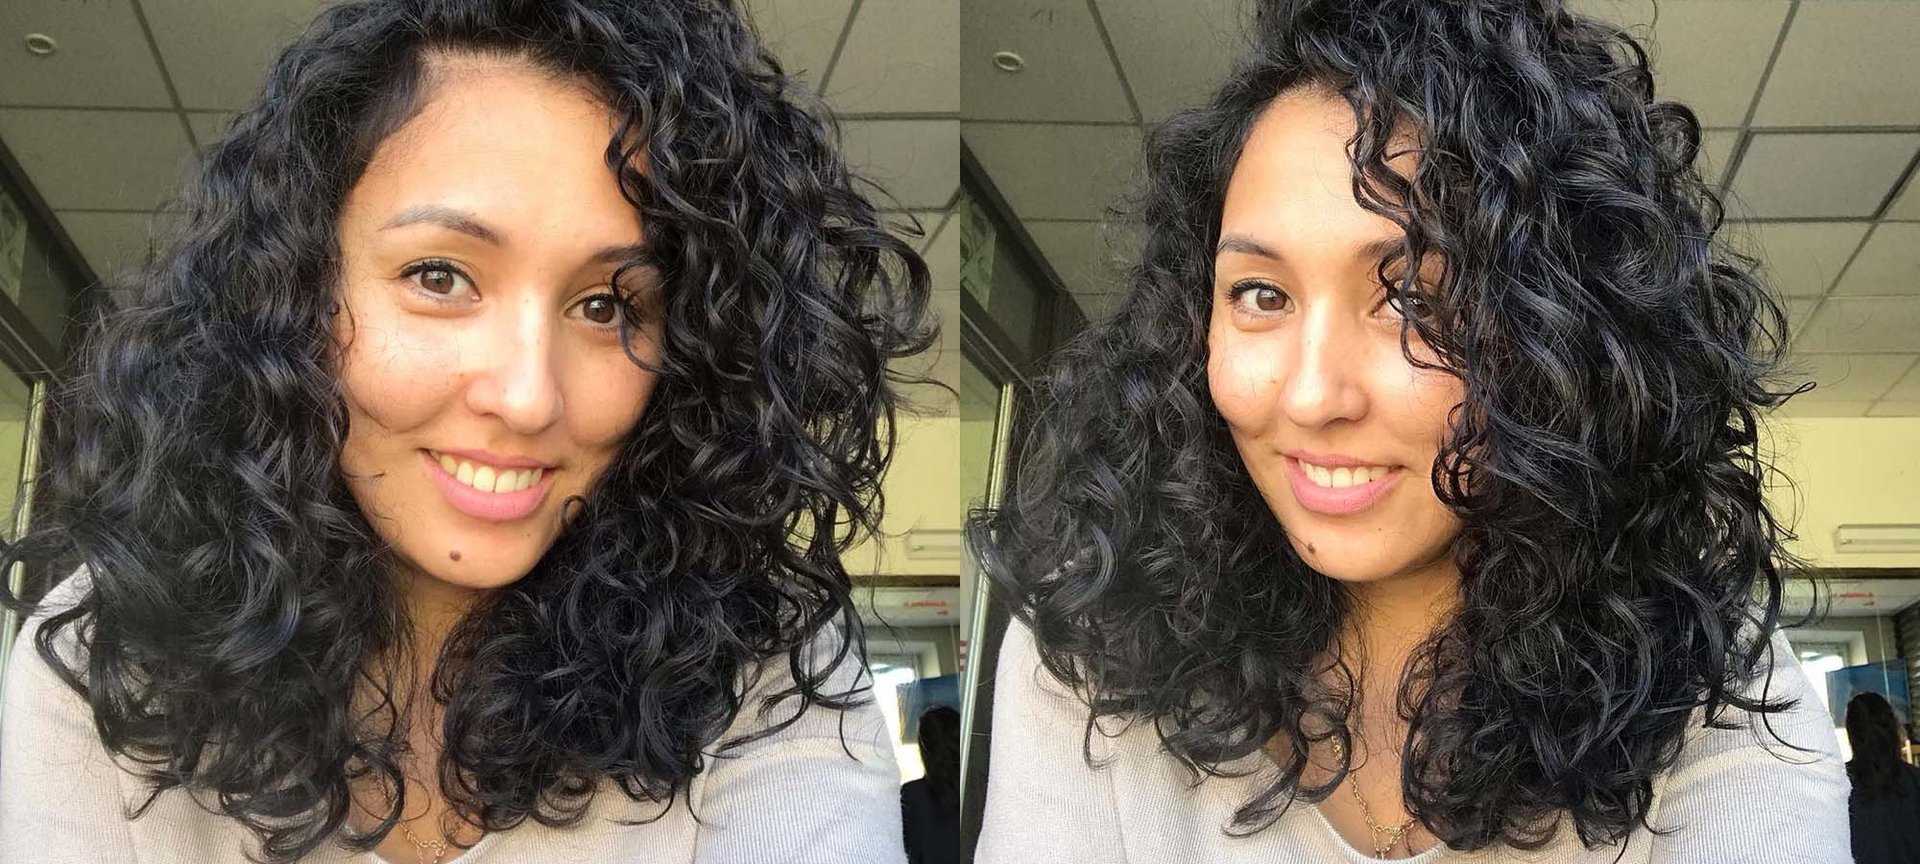 How To Get Your Curls Back After Chemical Straightening